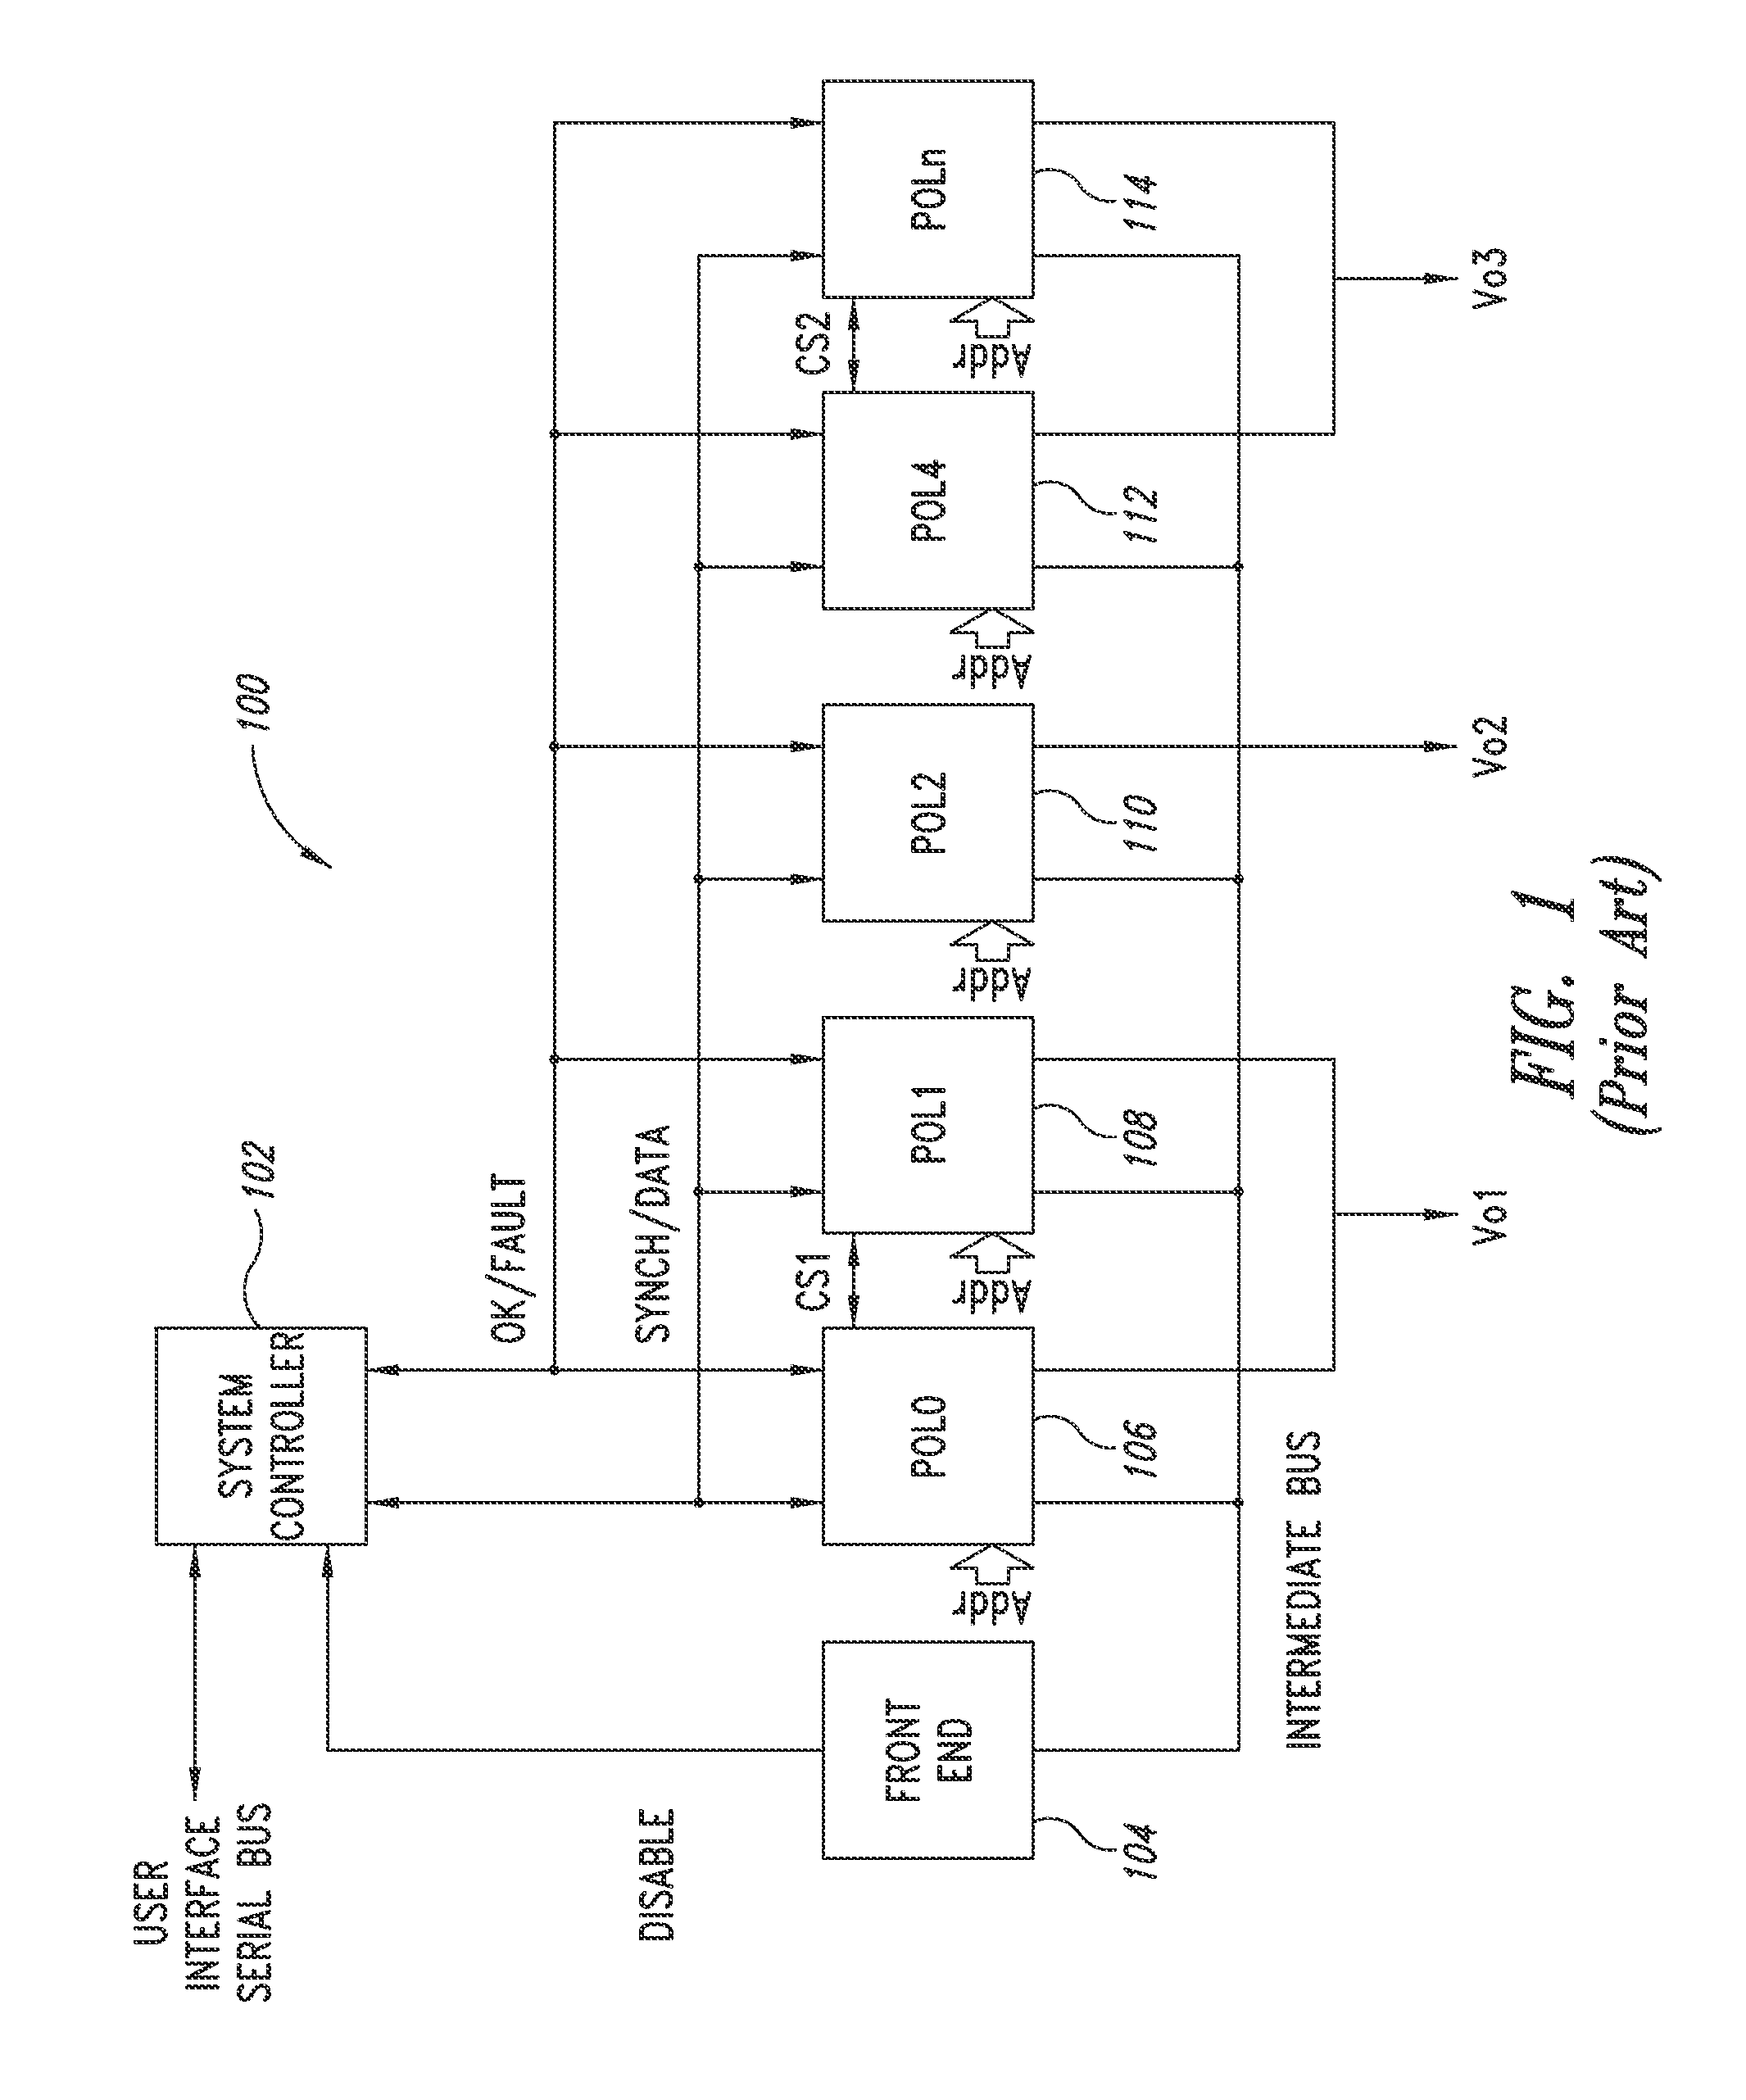 Power management architecture based on micro/processor architecture with embedded and external nvm